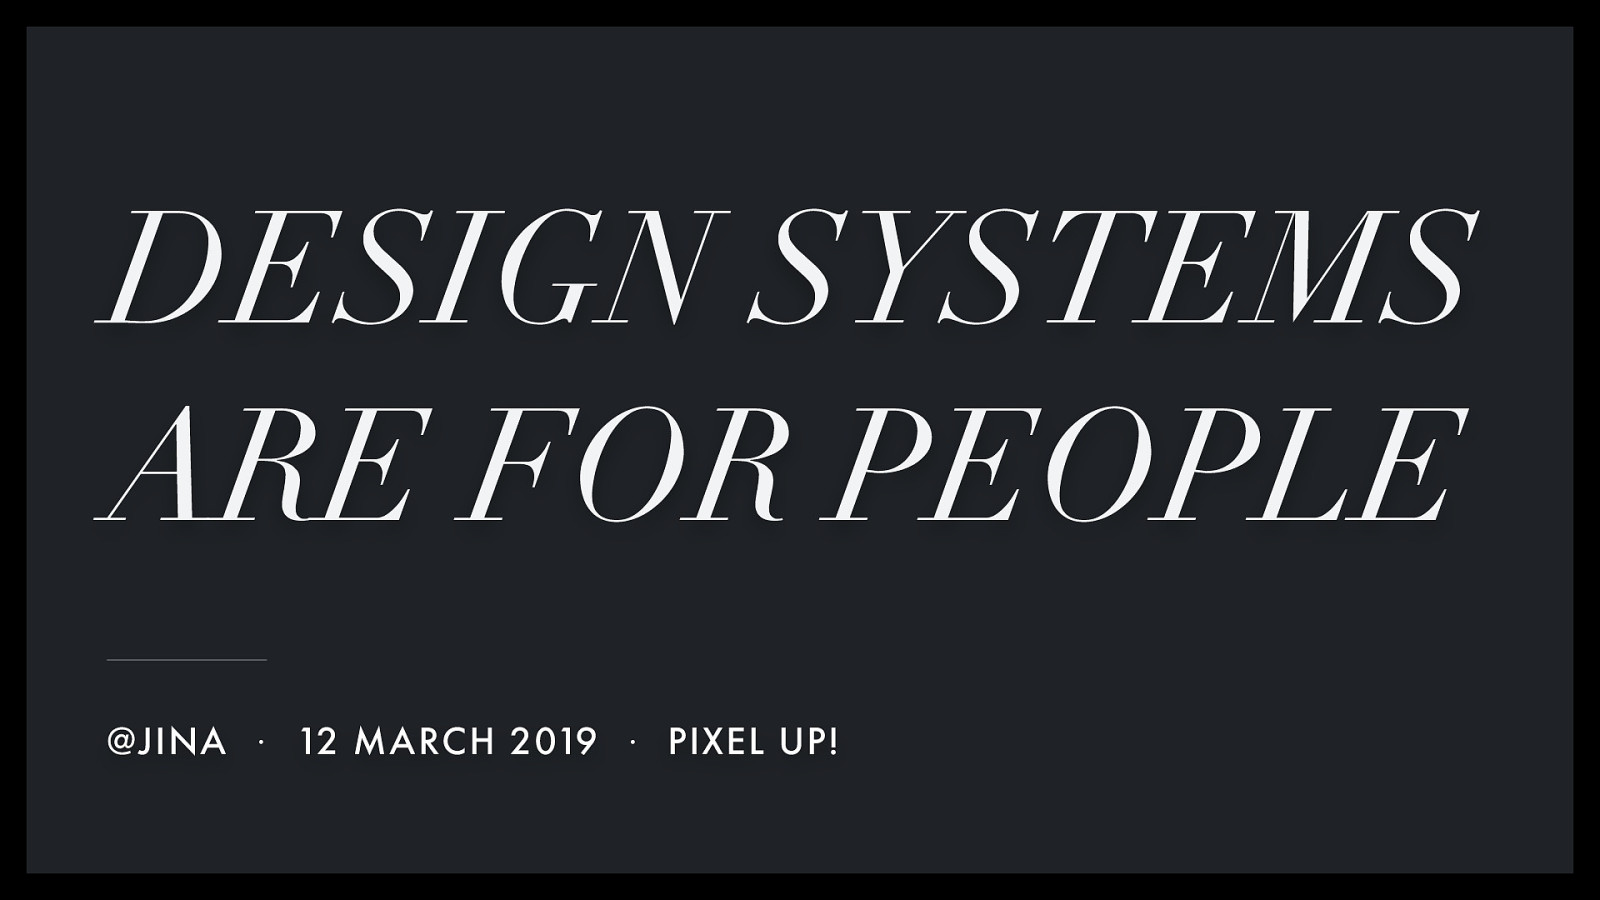 Design Systems are for People